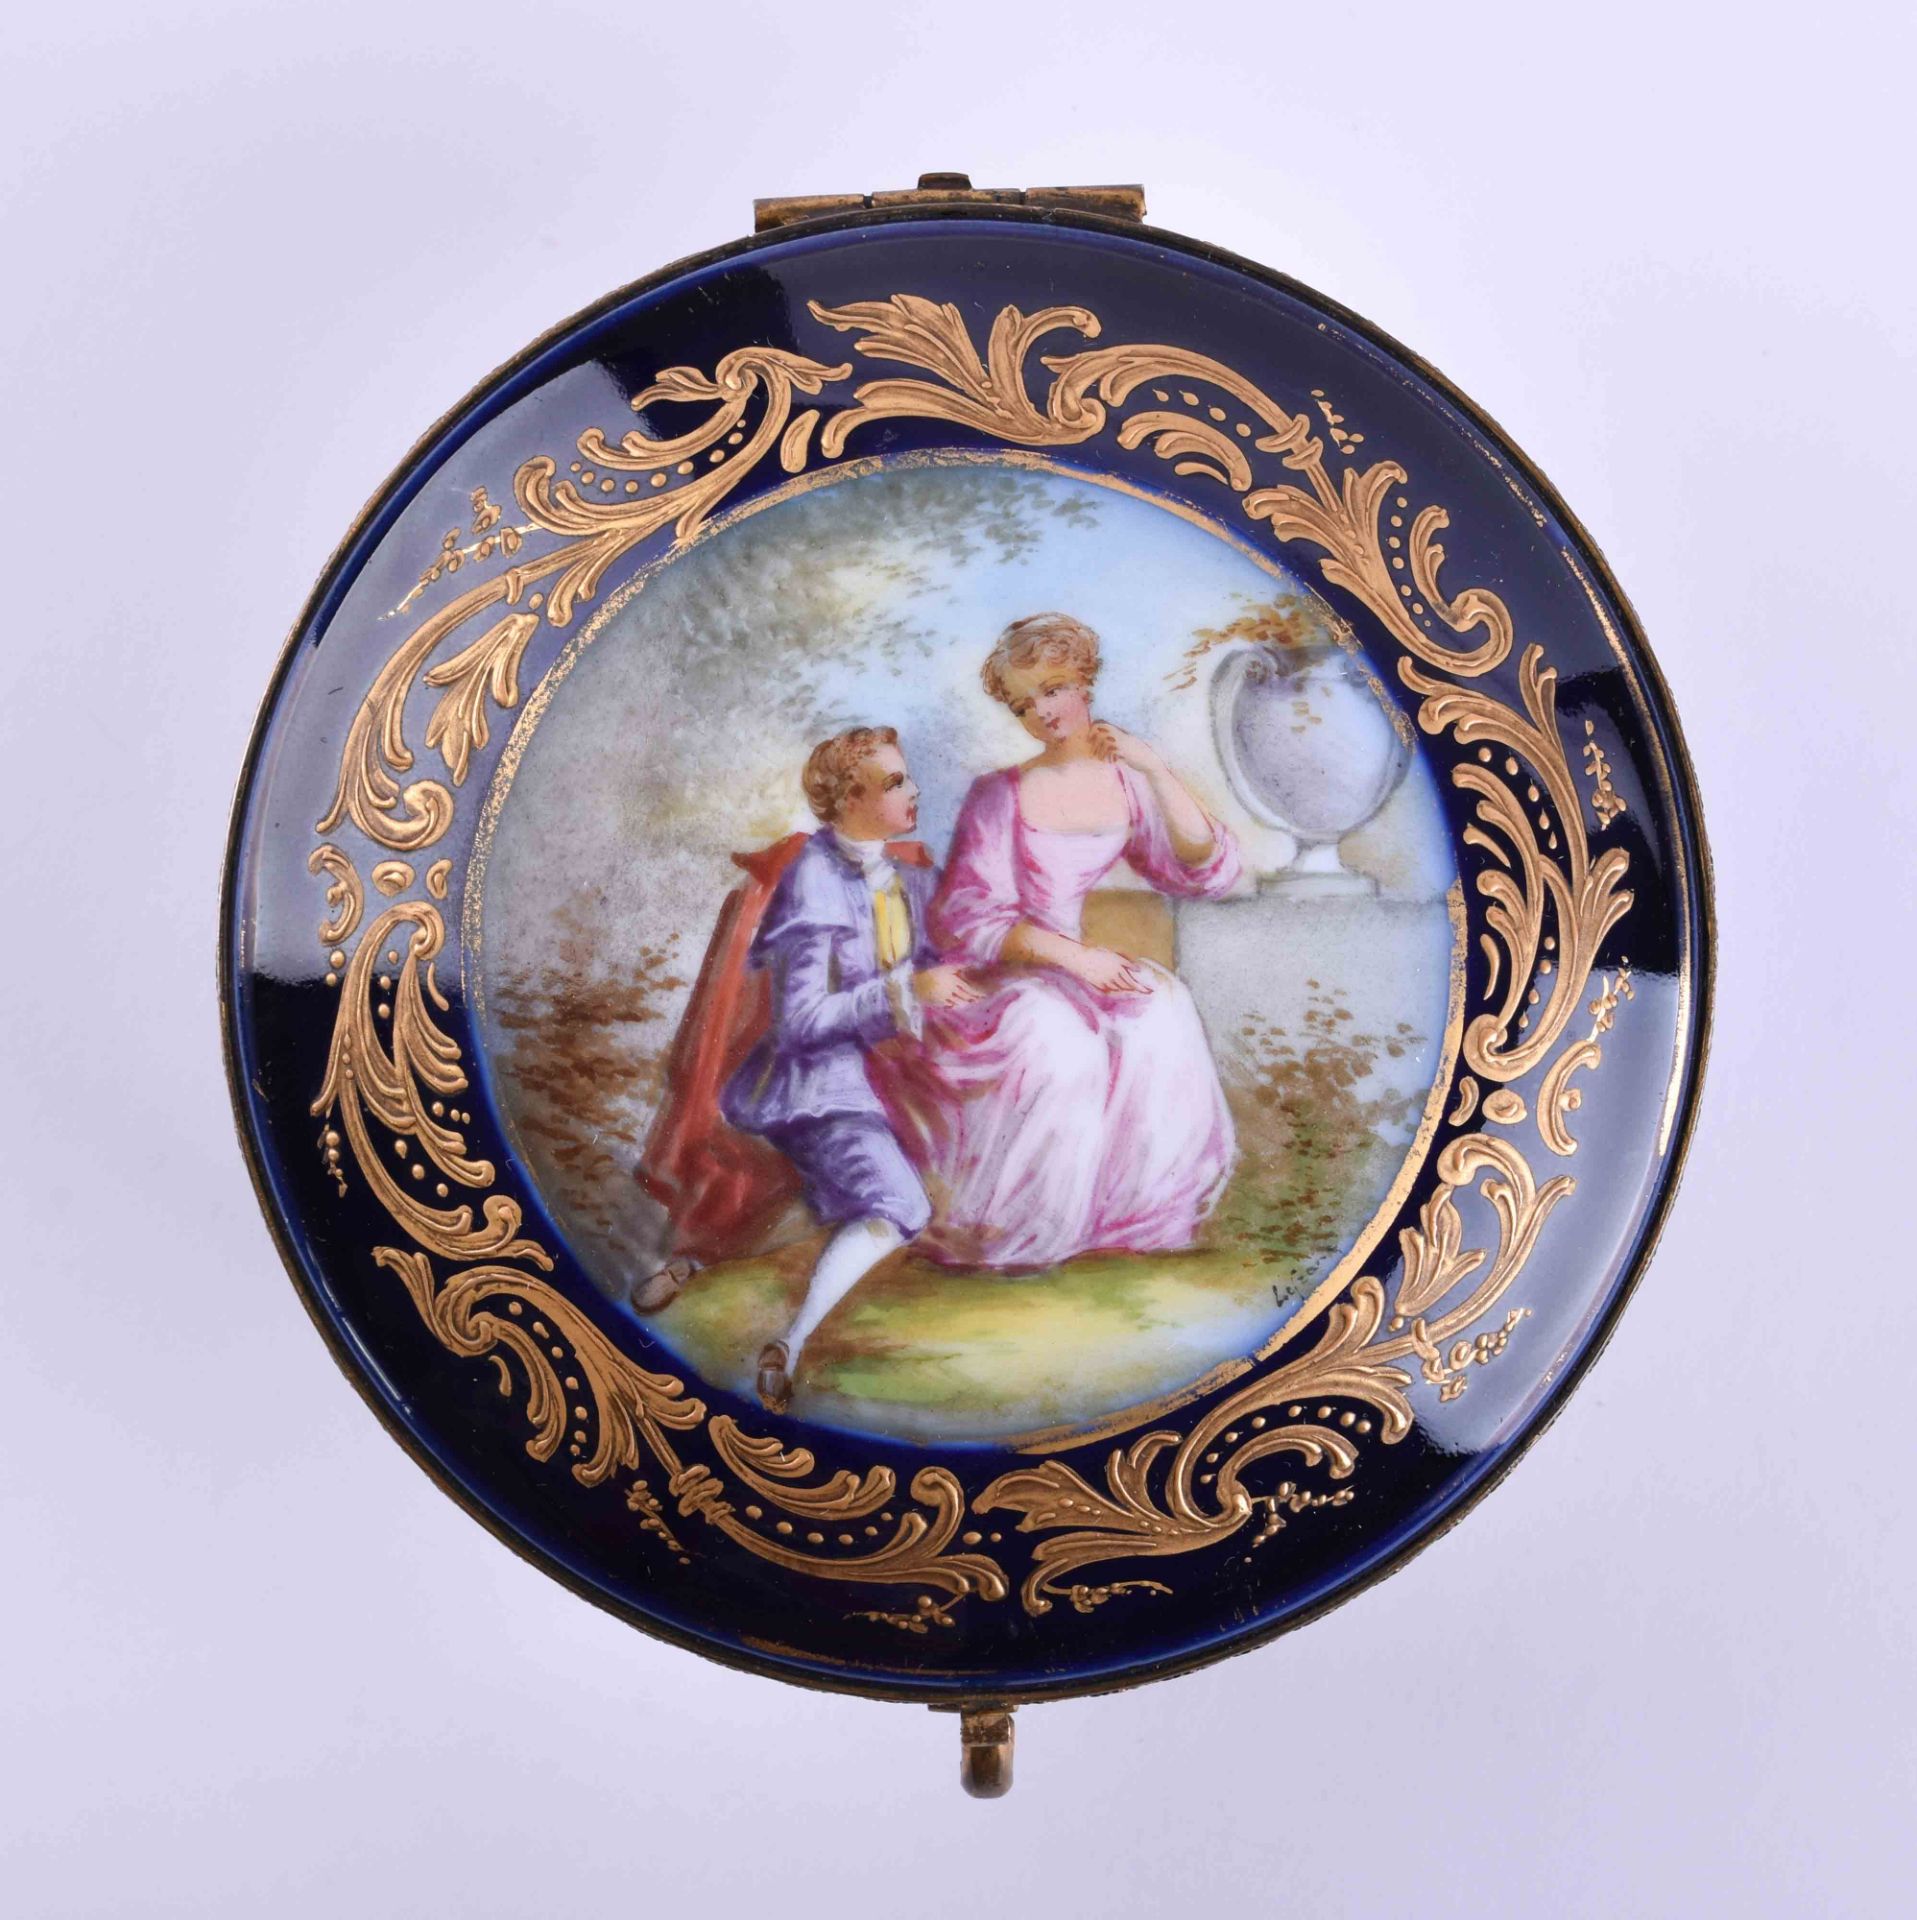  Porcelain cover box Sevres - Image 2 of 6